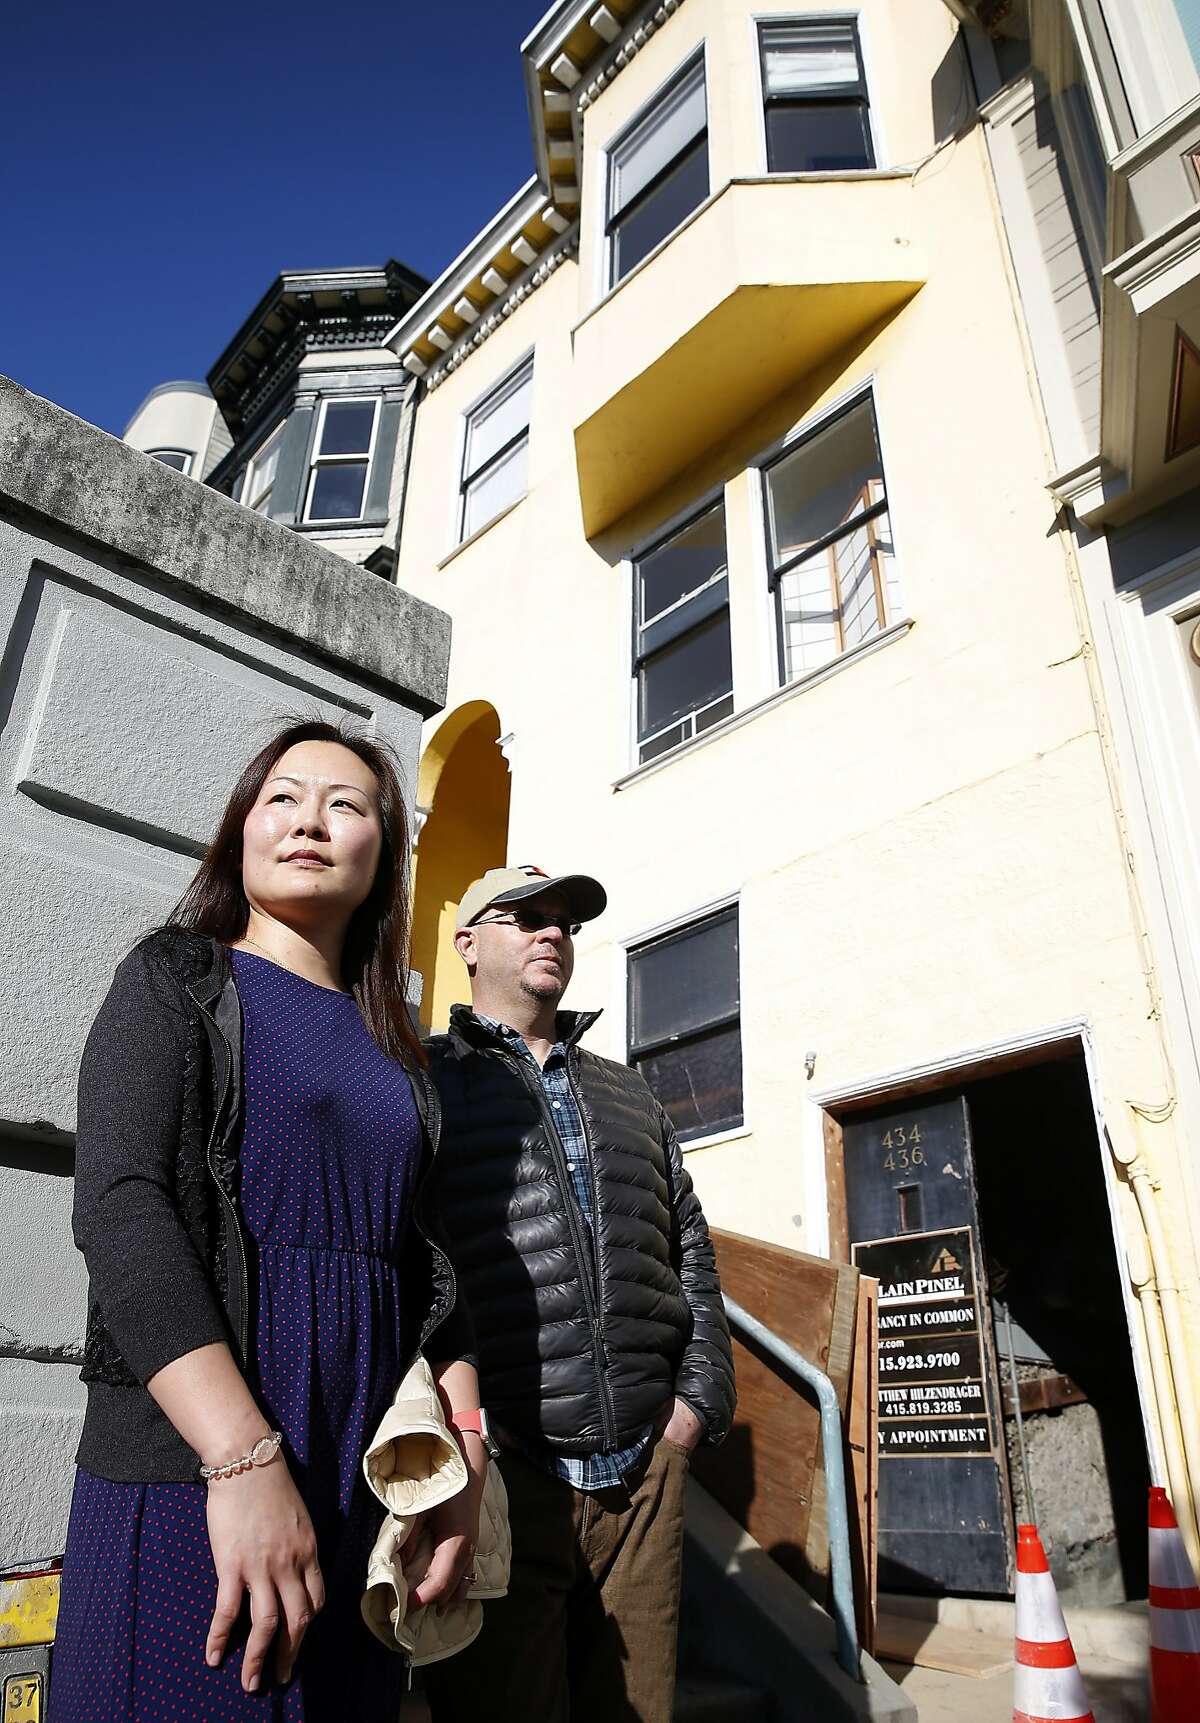 Michelle Huang and Tom Payne stop in front of the building on Vallejo Street where they own three TIC units in San Francisco, Calif. on Thursday, Feb. 4, 2016. They are embroiled in a feud with the owner of one of the other units who rented one of theirs through Airbnb and is now claiming residency asserting tenants rights.